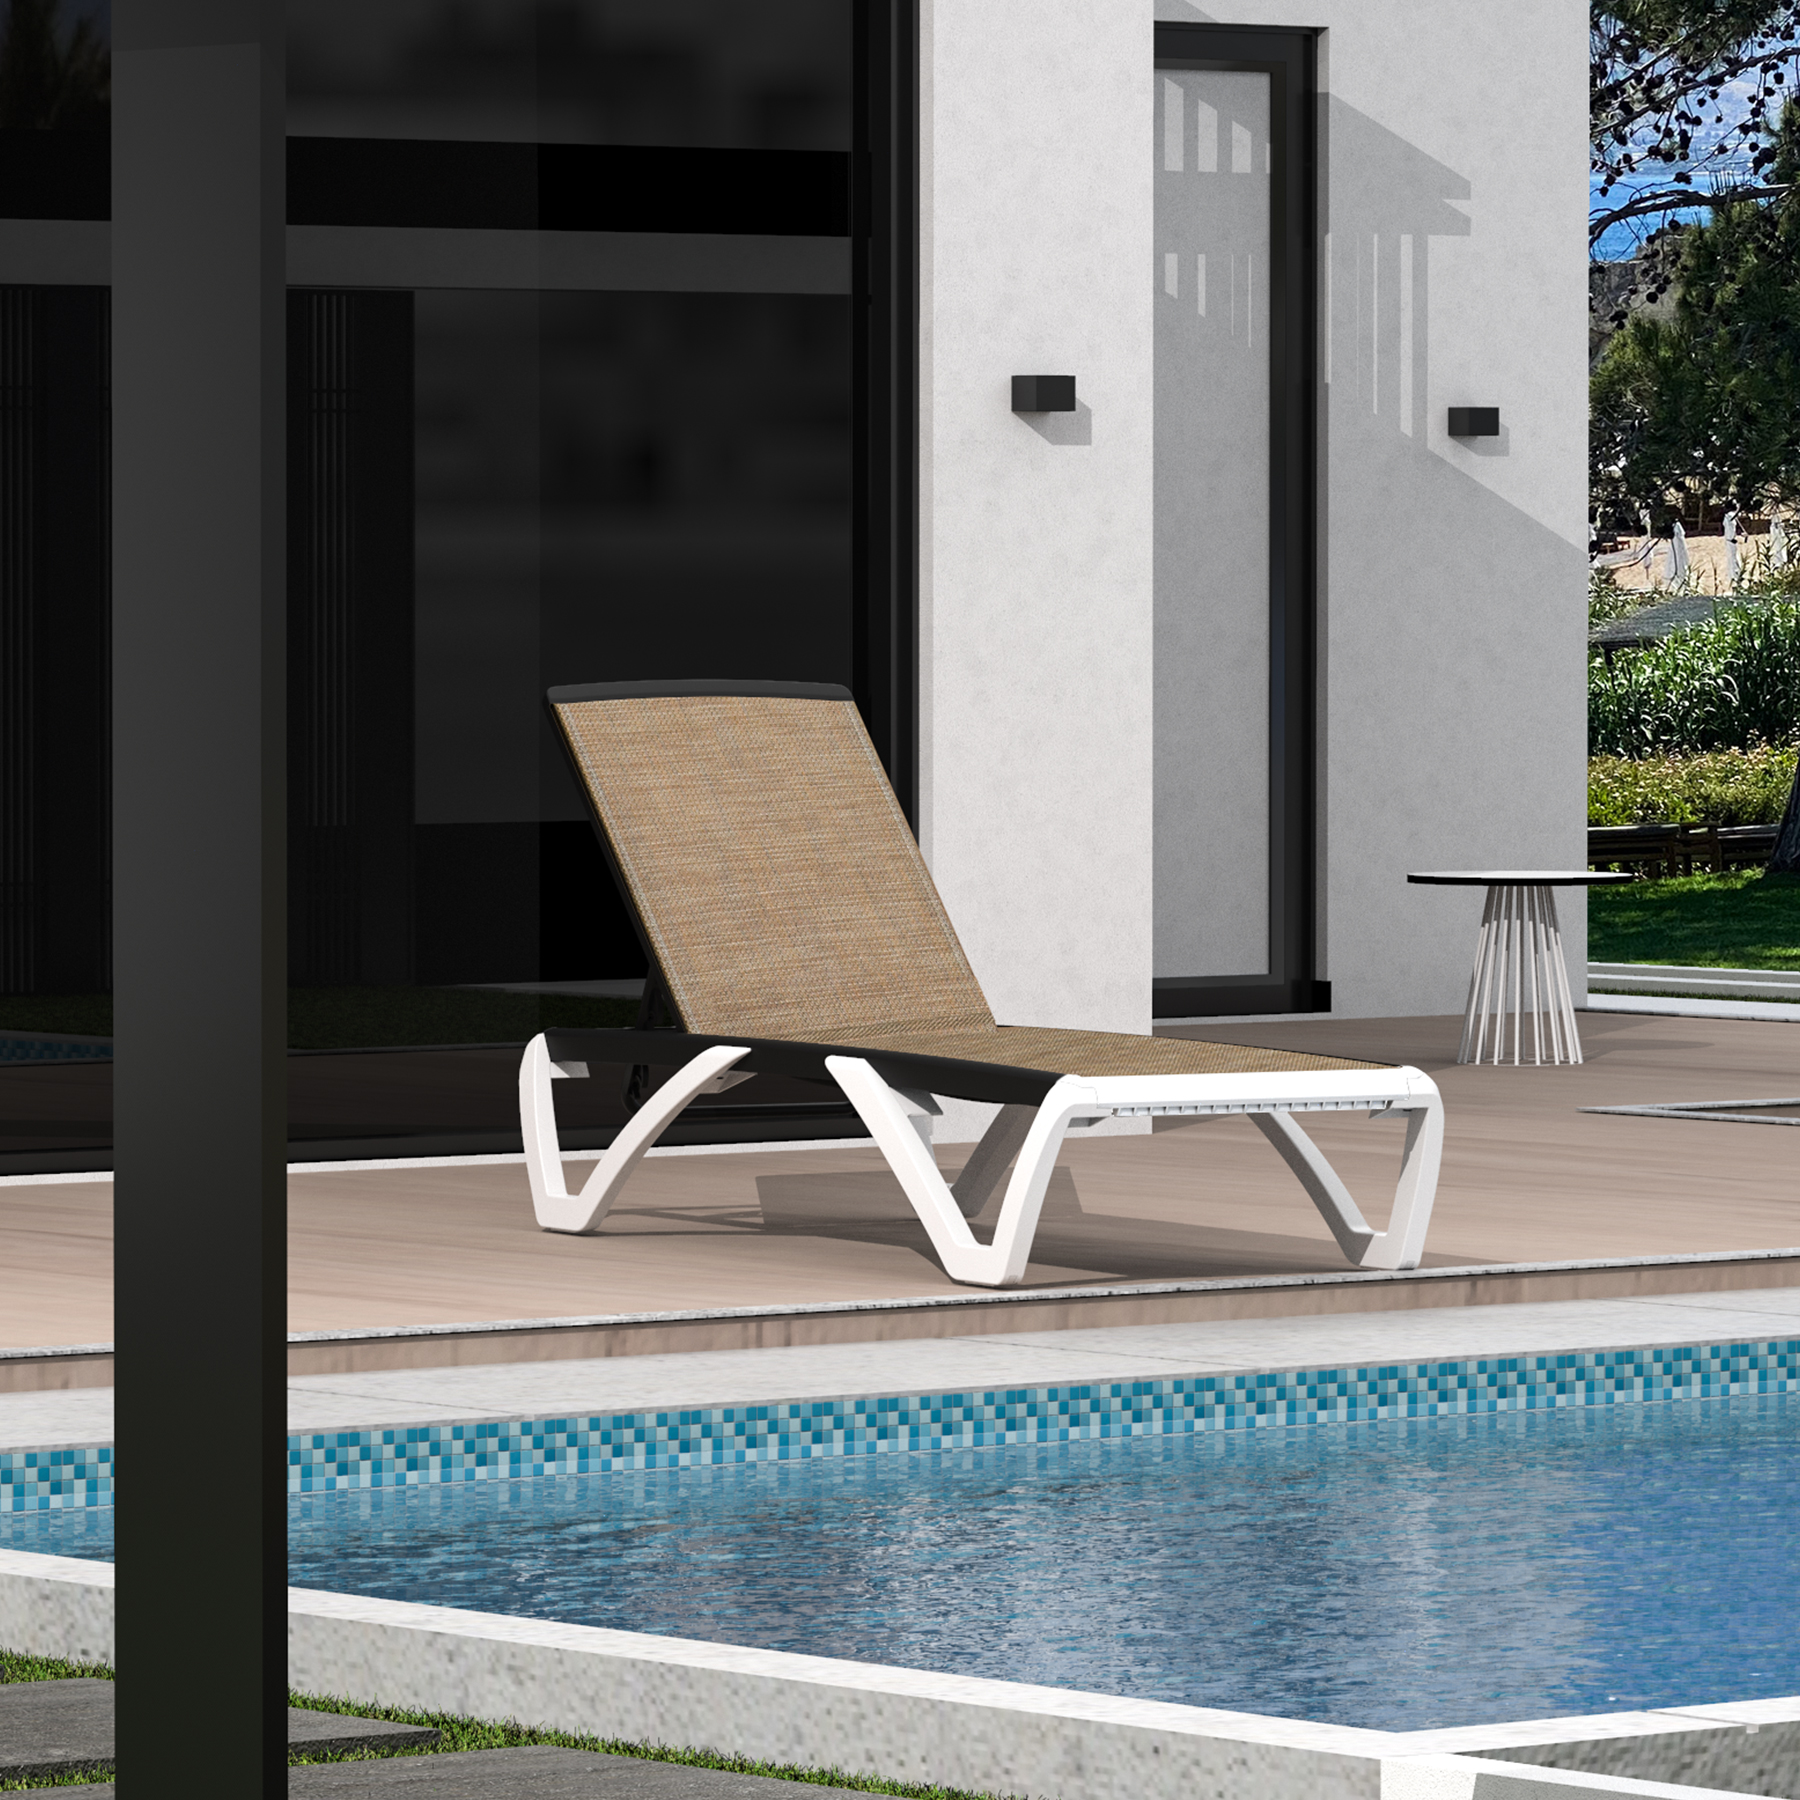 Domi Outdoor Aluminum Patio Chaise Lounge Chair, Adjustable Backrest, Polypropylene, Beach Patio Chair - image 2 of 3